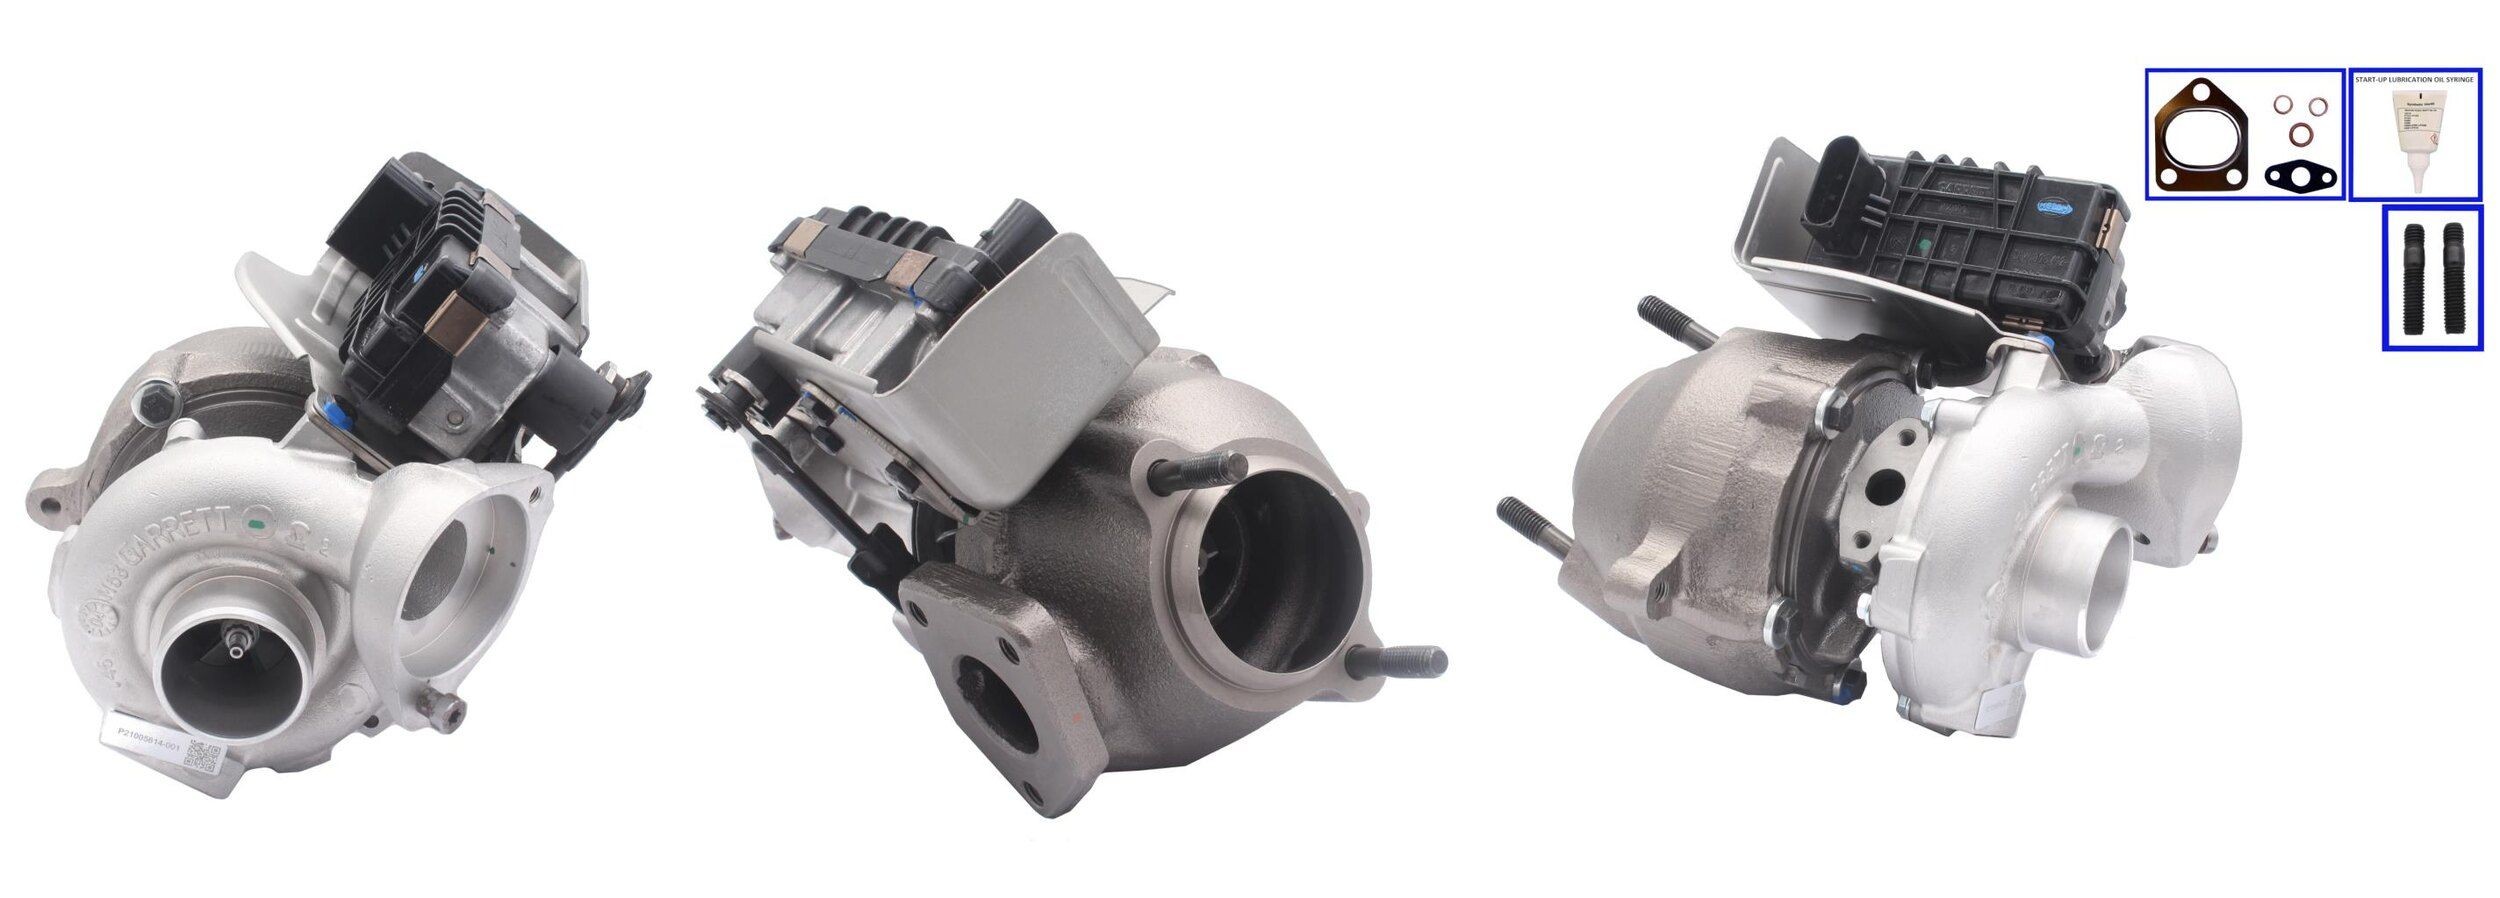 TURBO MOTOR Exhaust Turbocharger, Electrically controlled actuator, with gaskets/seals Turbo PA7318779 buy